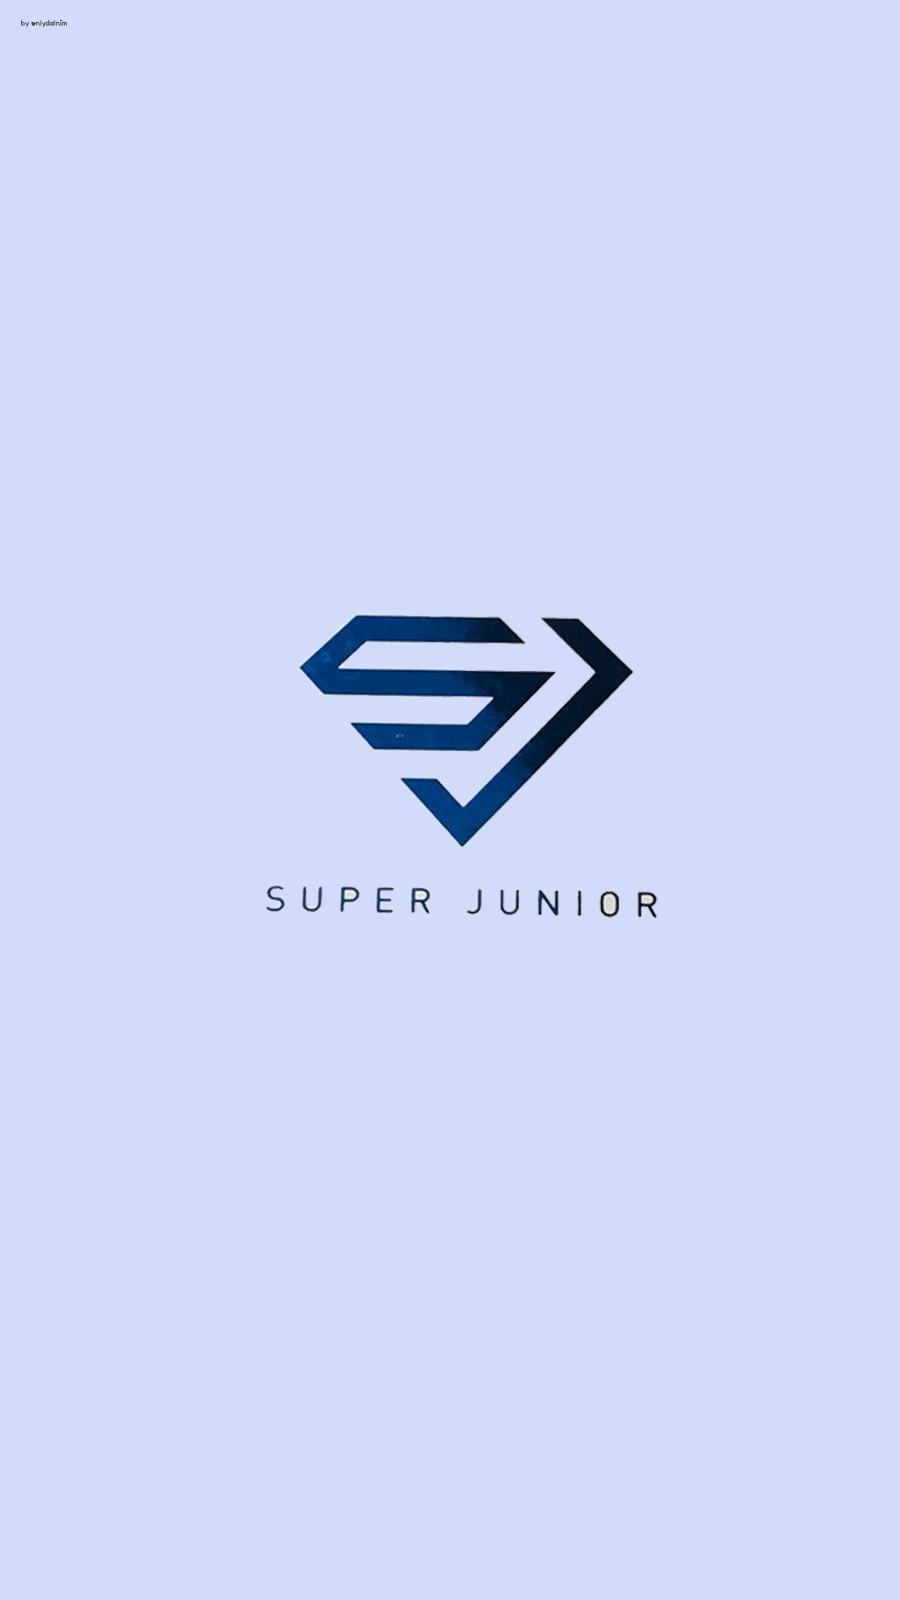 set to wallpaper already. really thanks to owner, perfect. Super junior, Super junior donghae, Junior